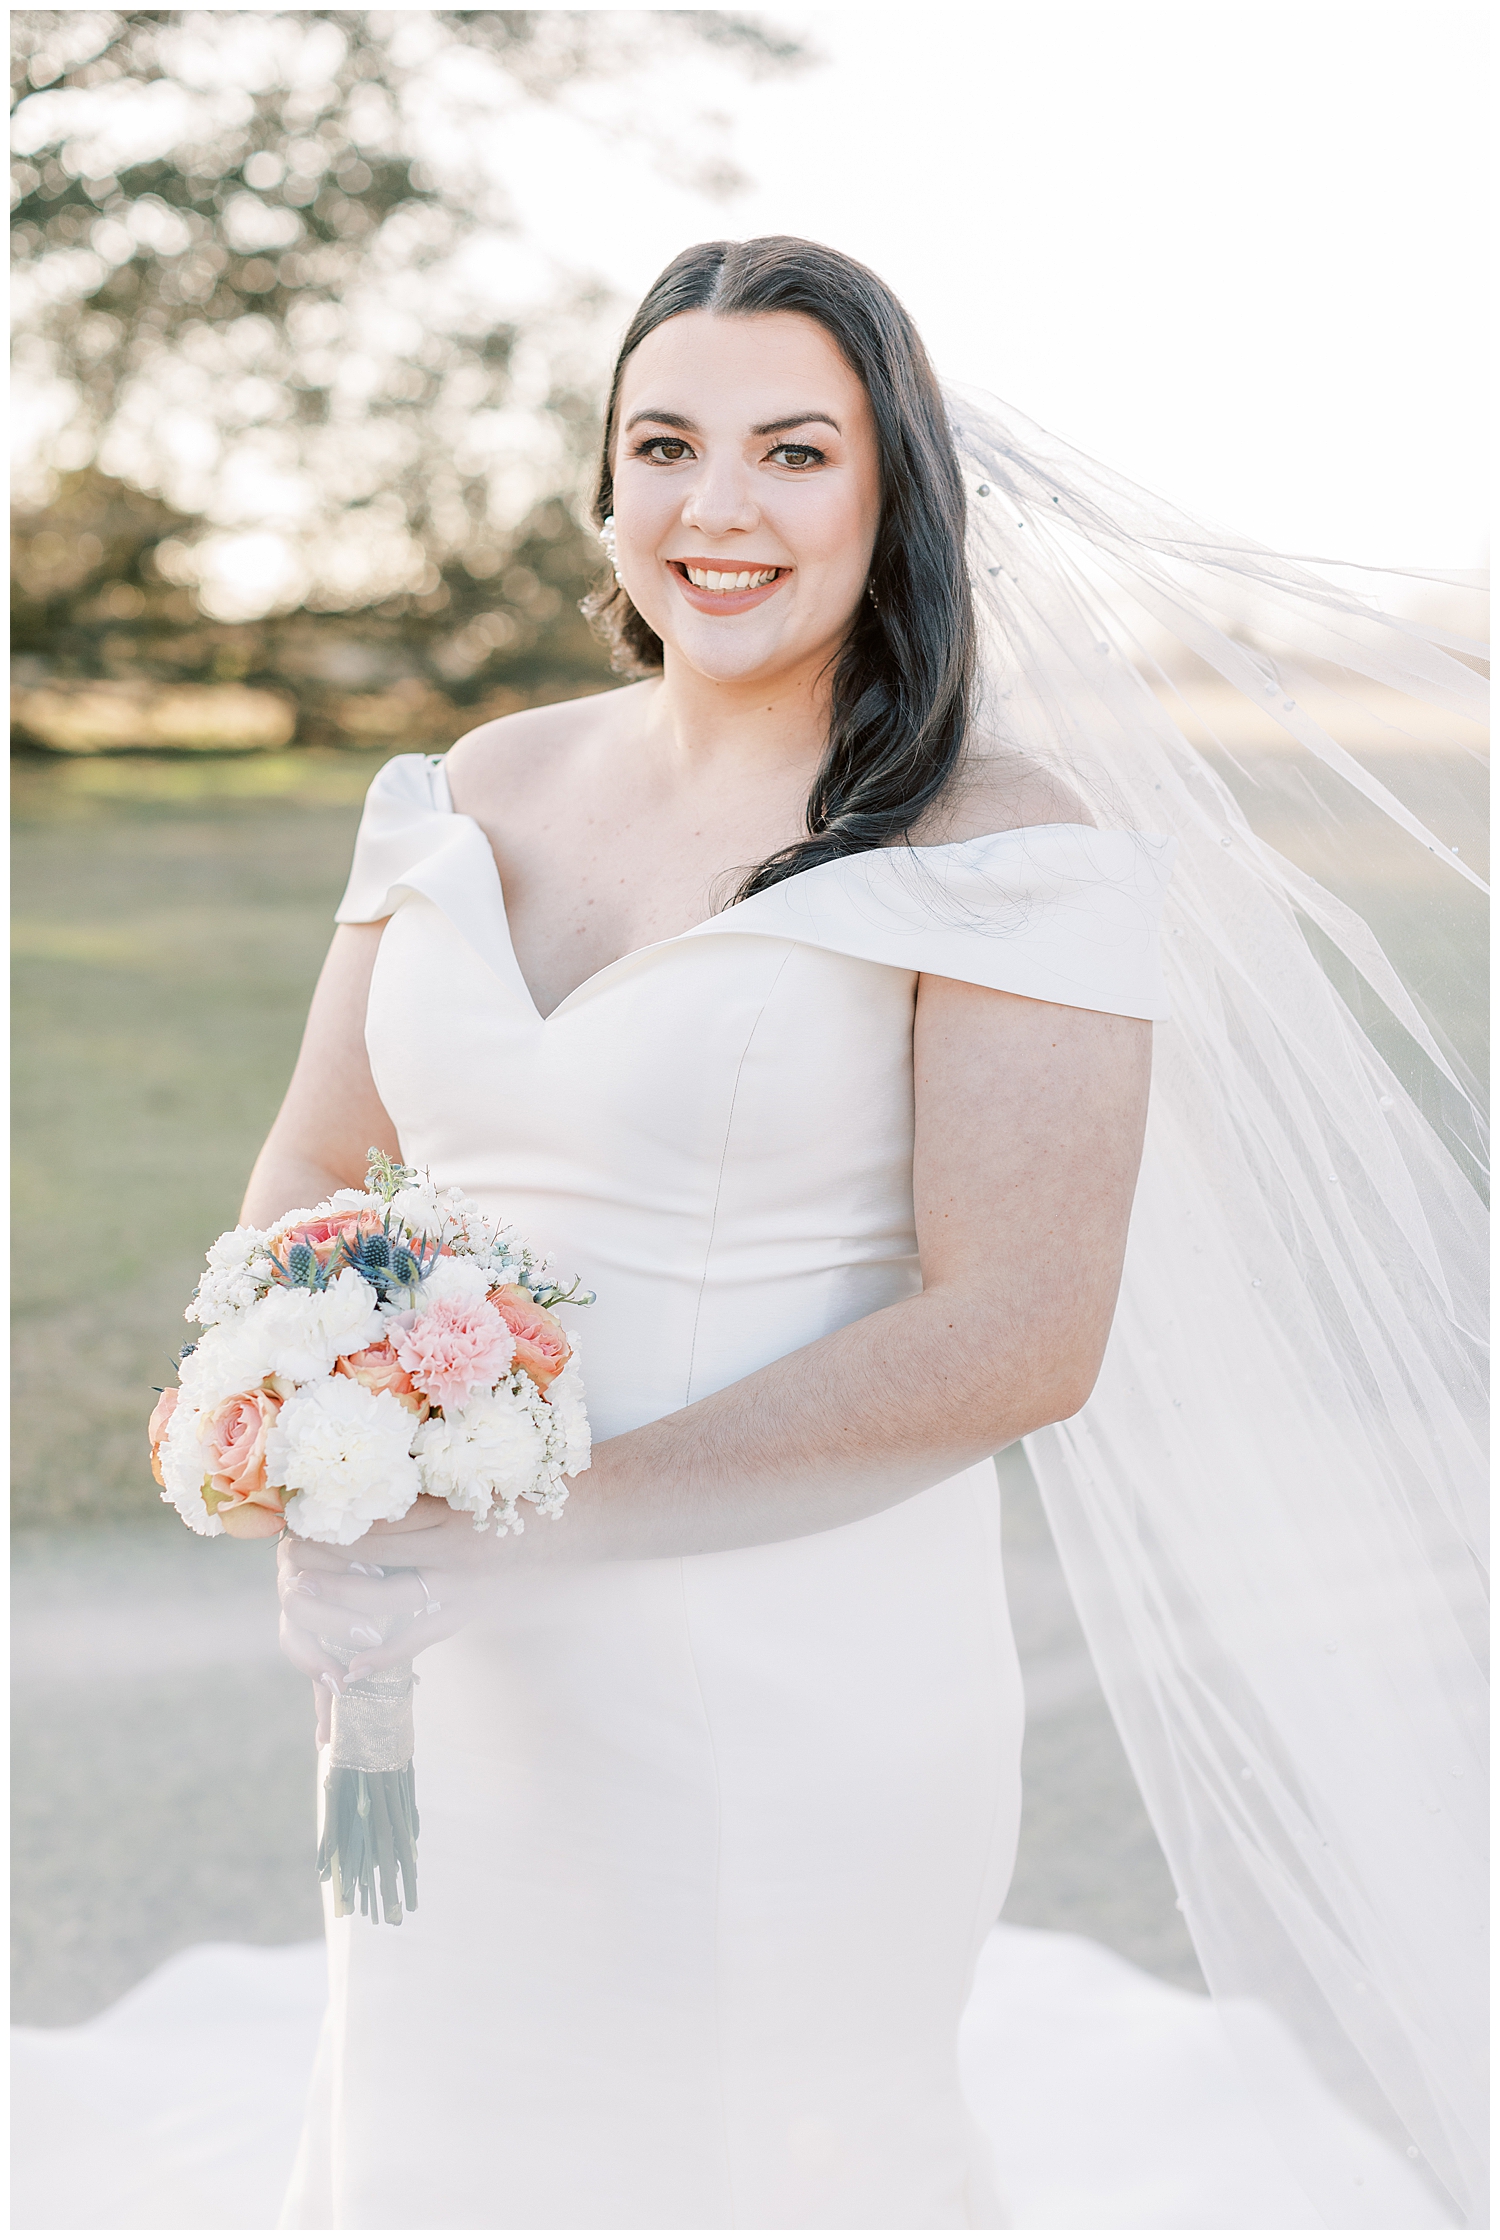 A bride holds her bouquet and smiles over her pearl veil.